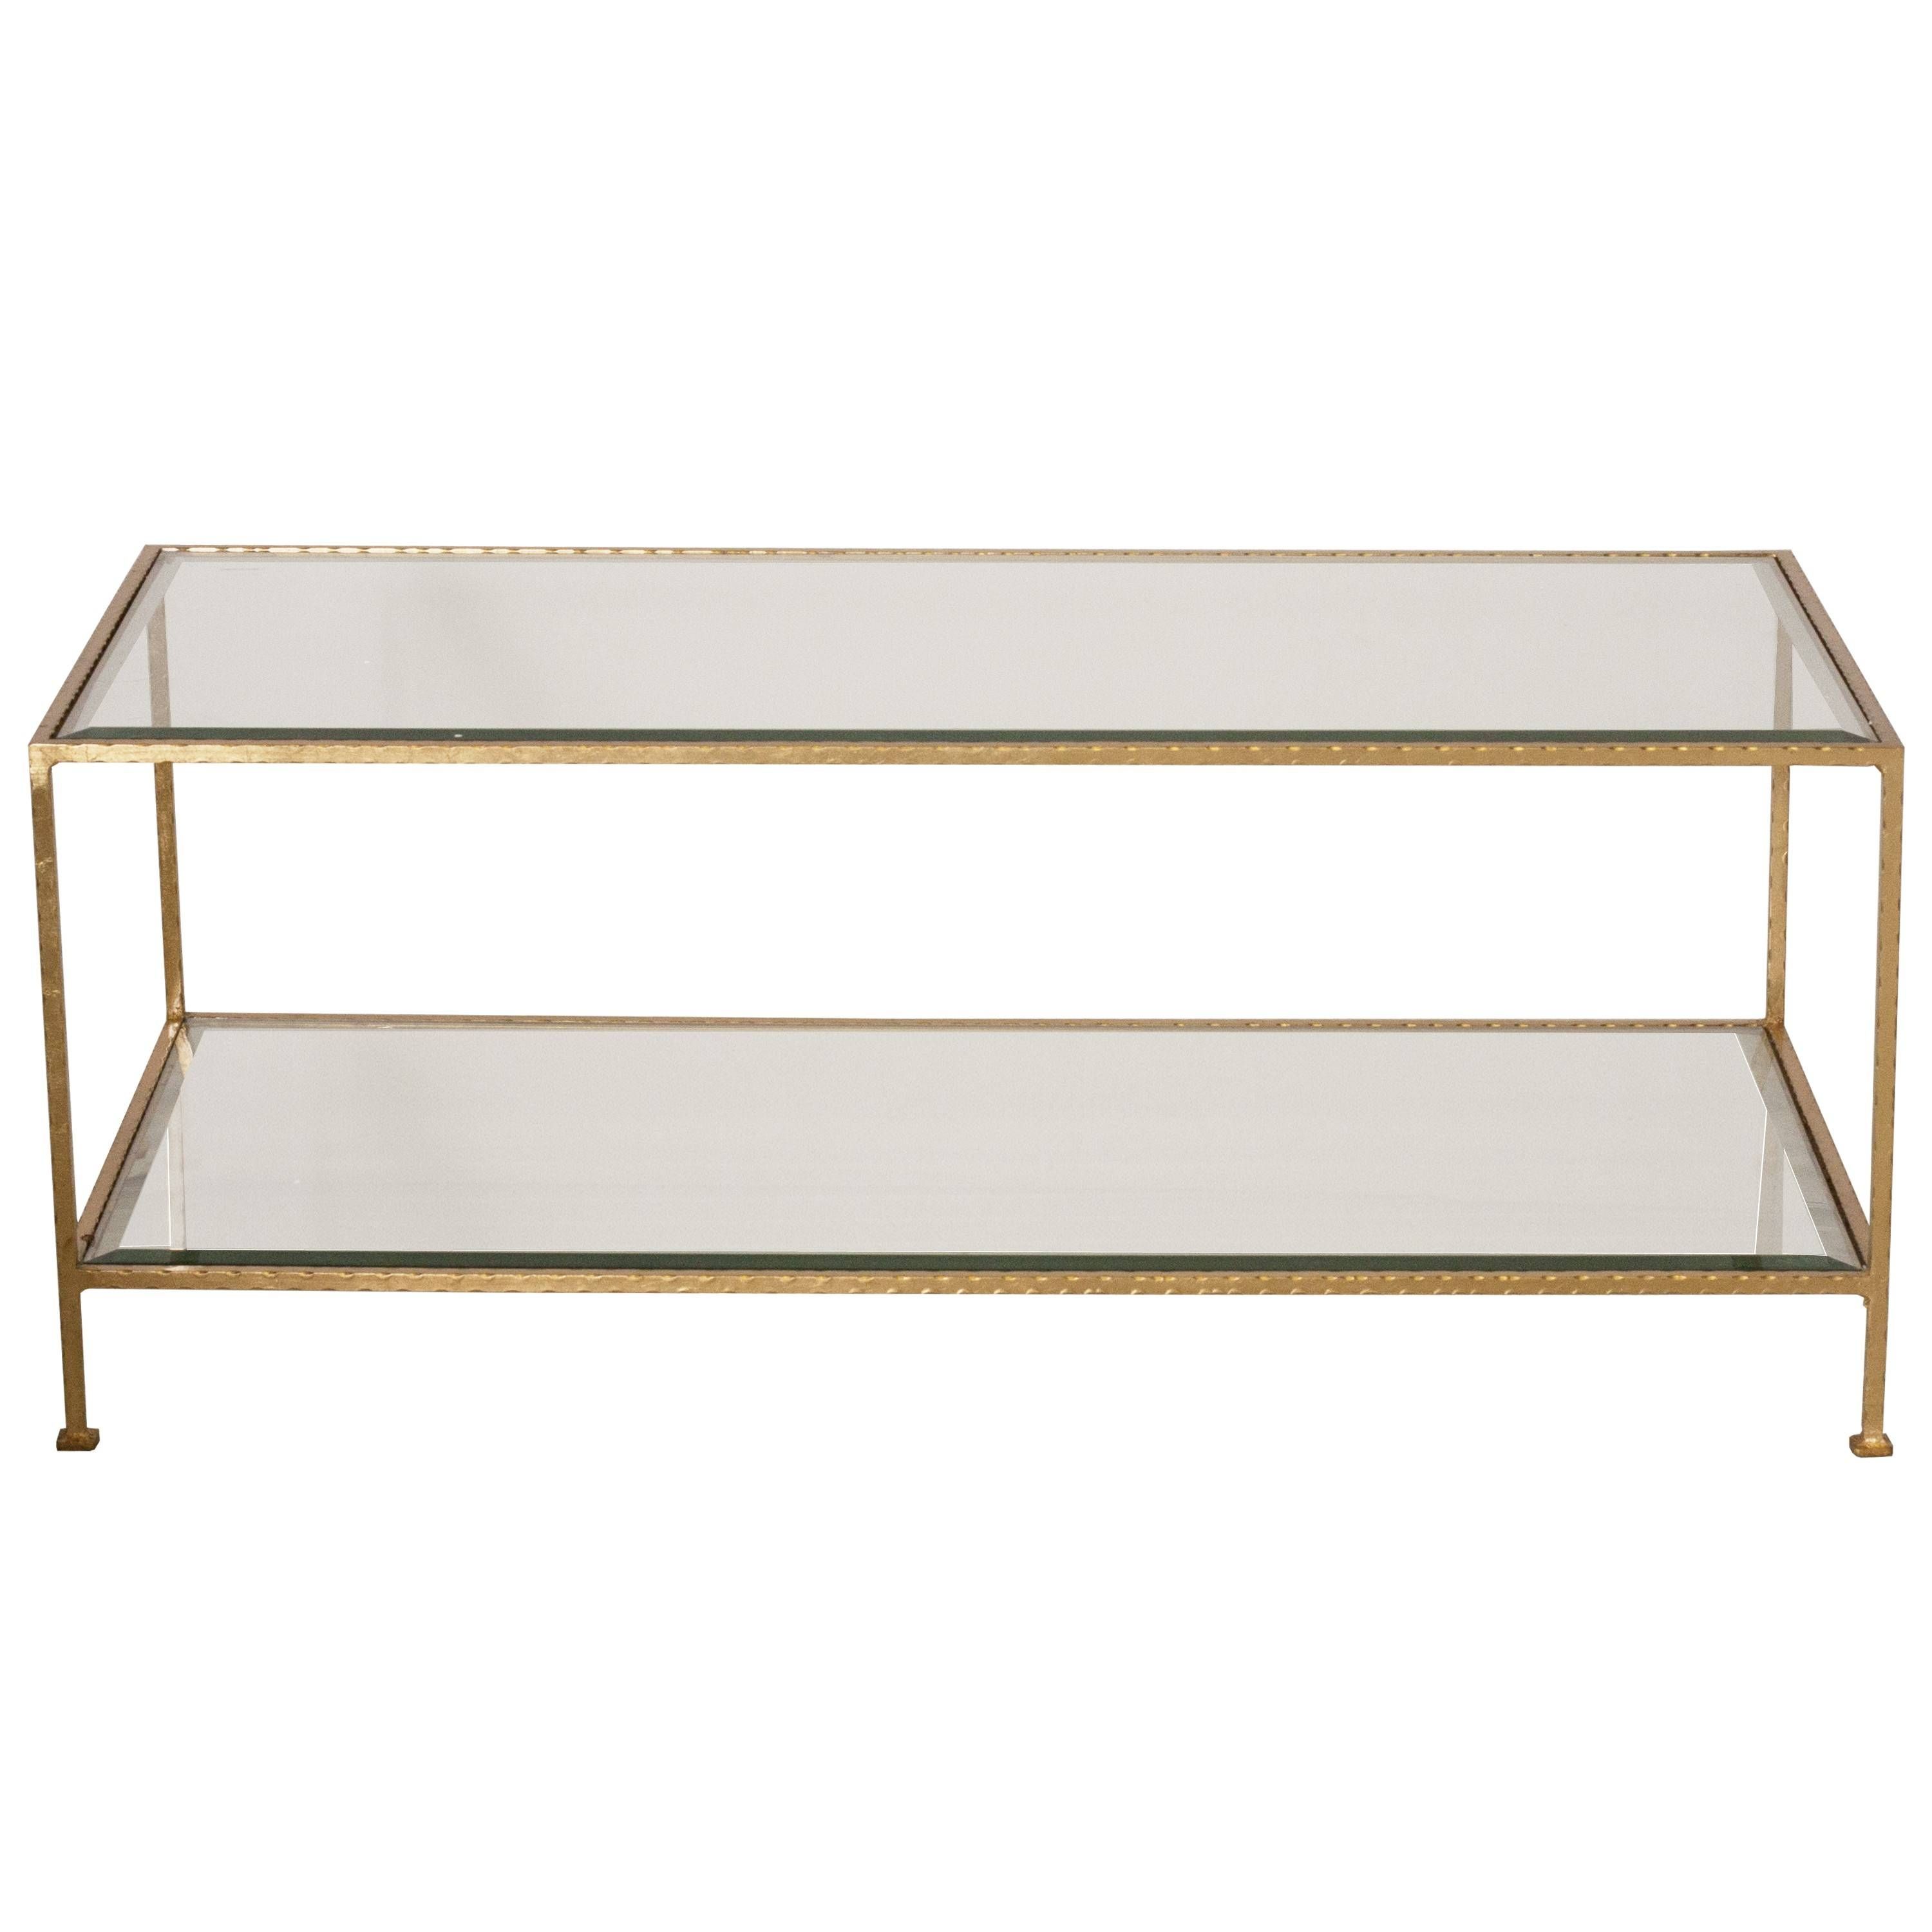 Coffee Table: Excellent Gold Metal Coffee Table Designs Metal And Inside Glass And Metal Coffee Tables (View 21 of 30)